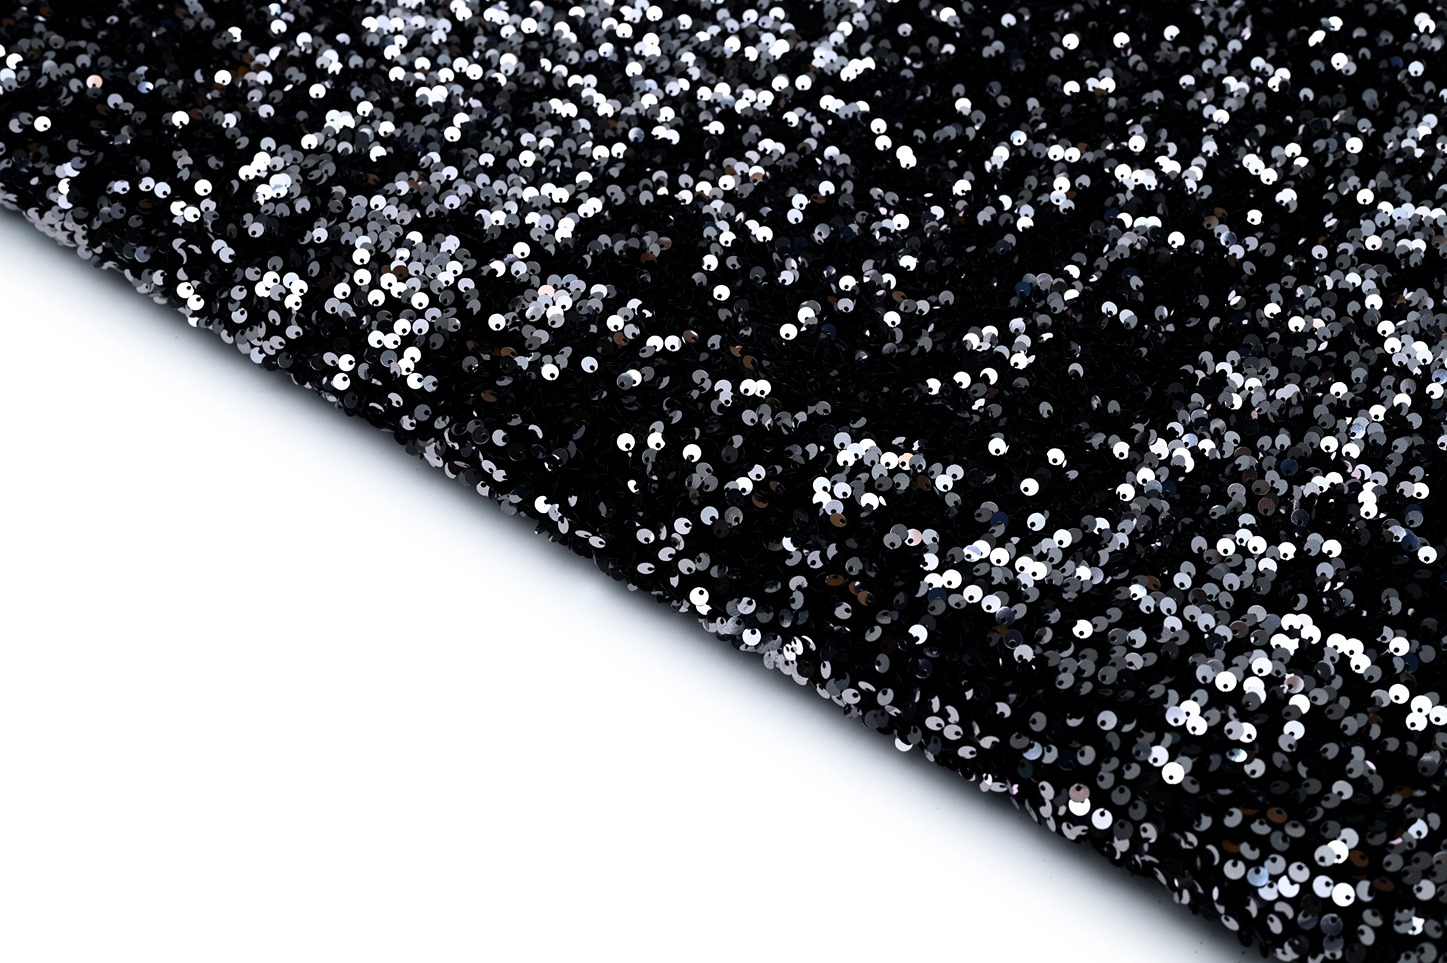 BLACK COLOR VELVET ALLOVER CRUSH SILVER SEQUINS PATTERN EMBROIDERY WORK FABRIC 9191